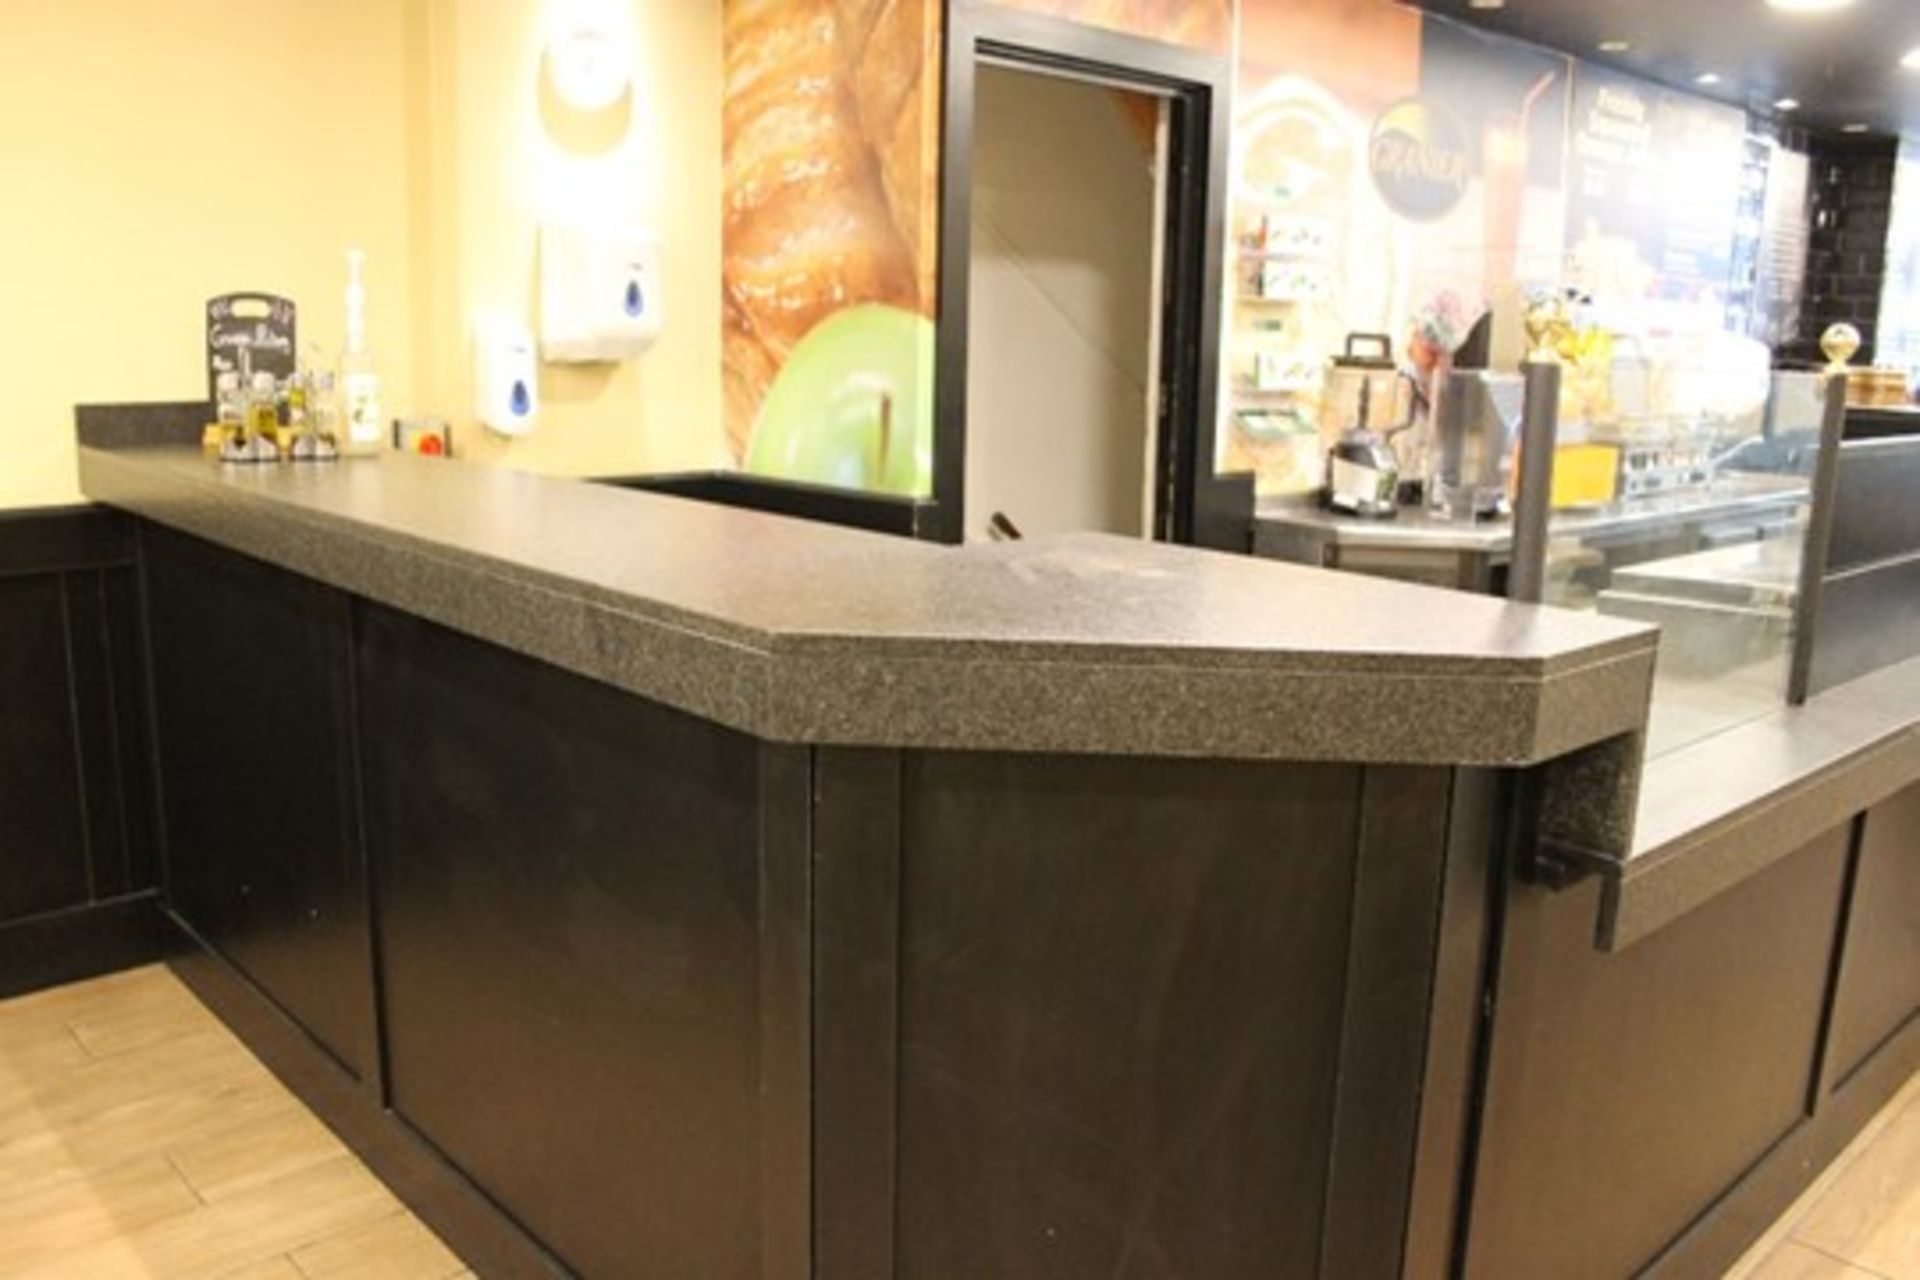 Huge Cafeteria Corner Service Counter – approx. W330cm x D80cm to the front + 300cm x 80cm right - Image 2 of 2